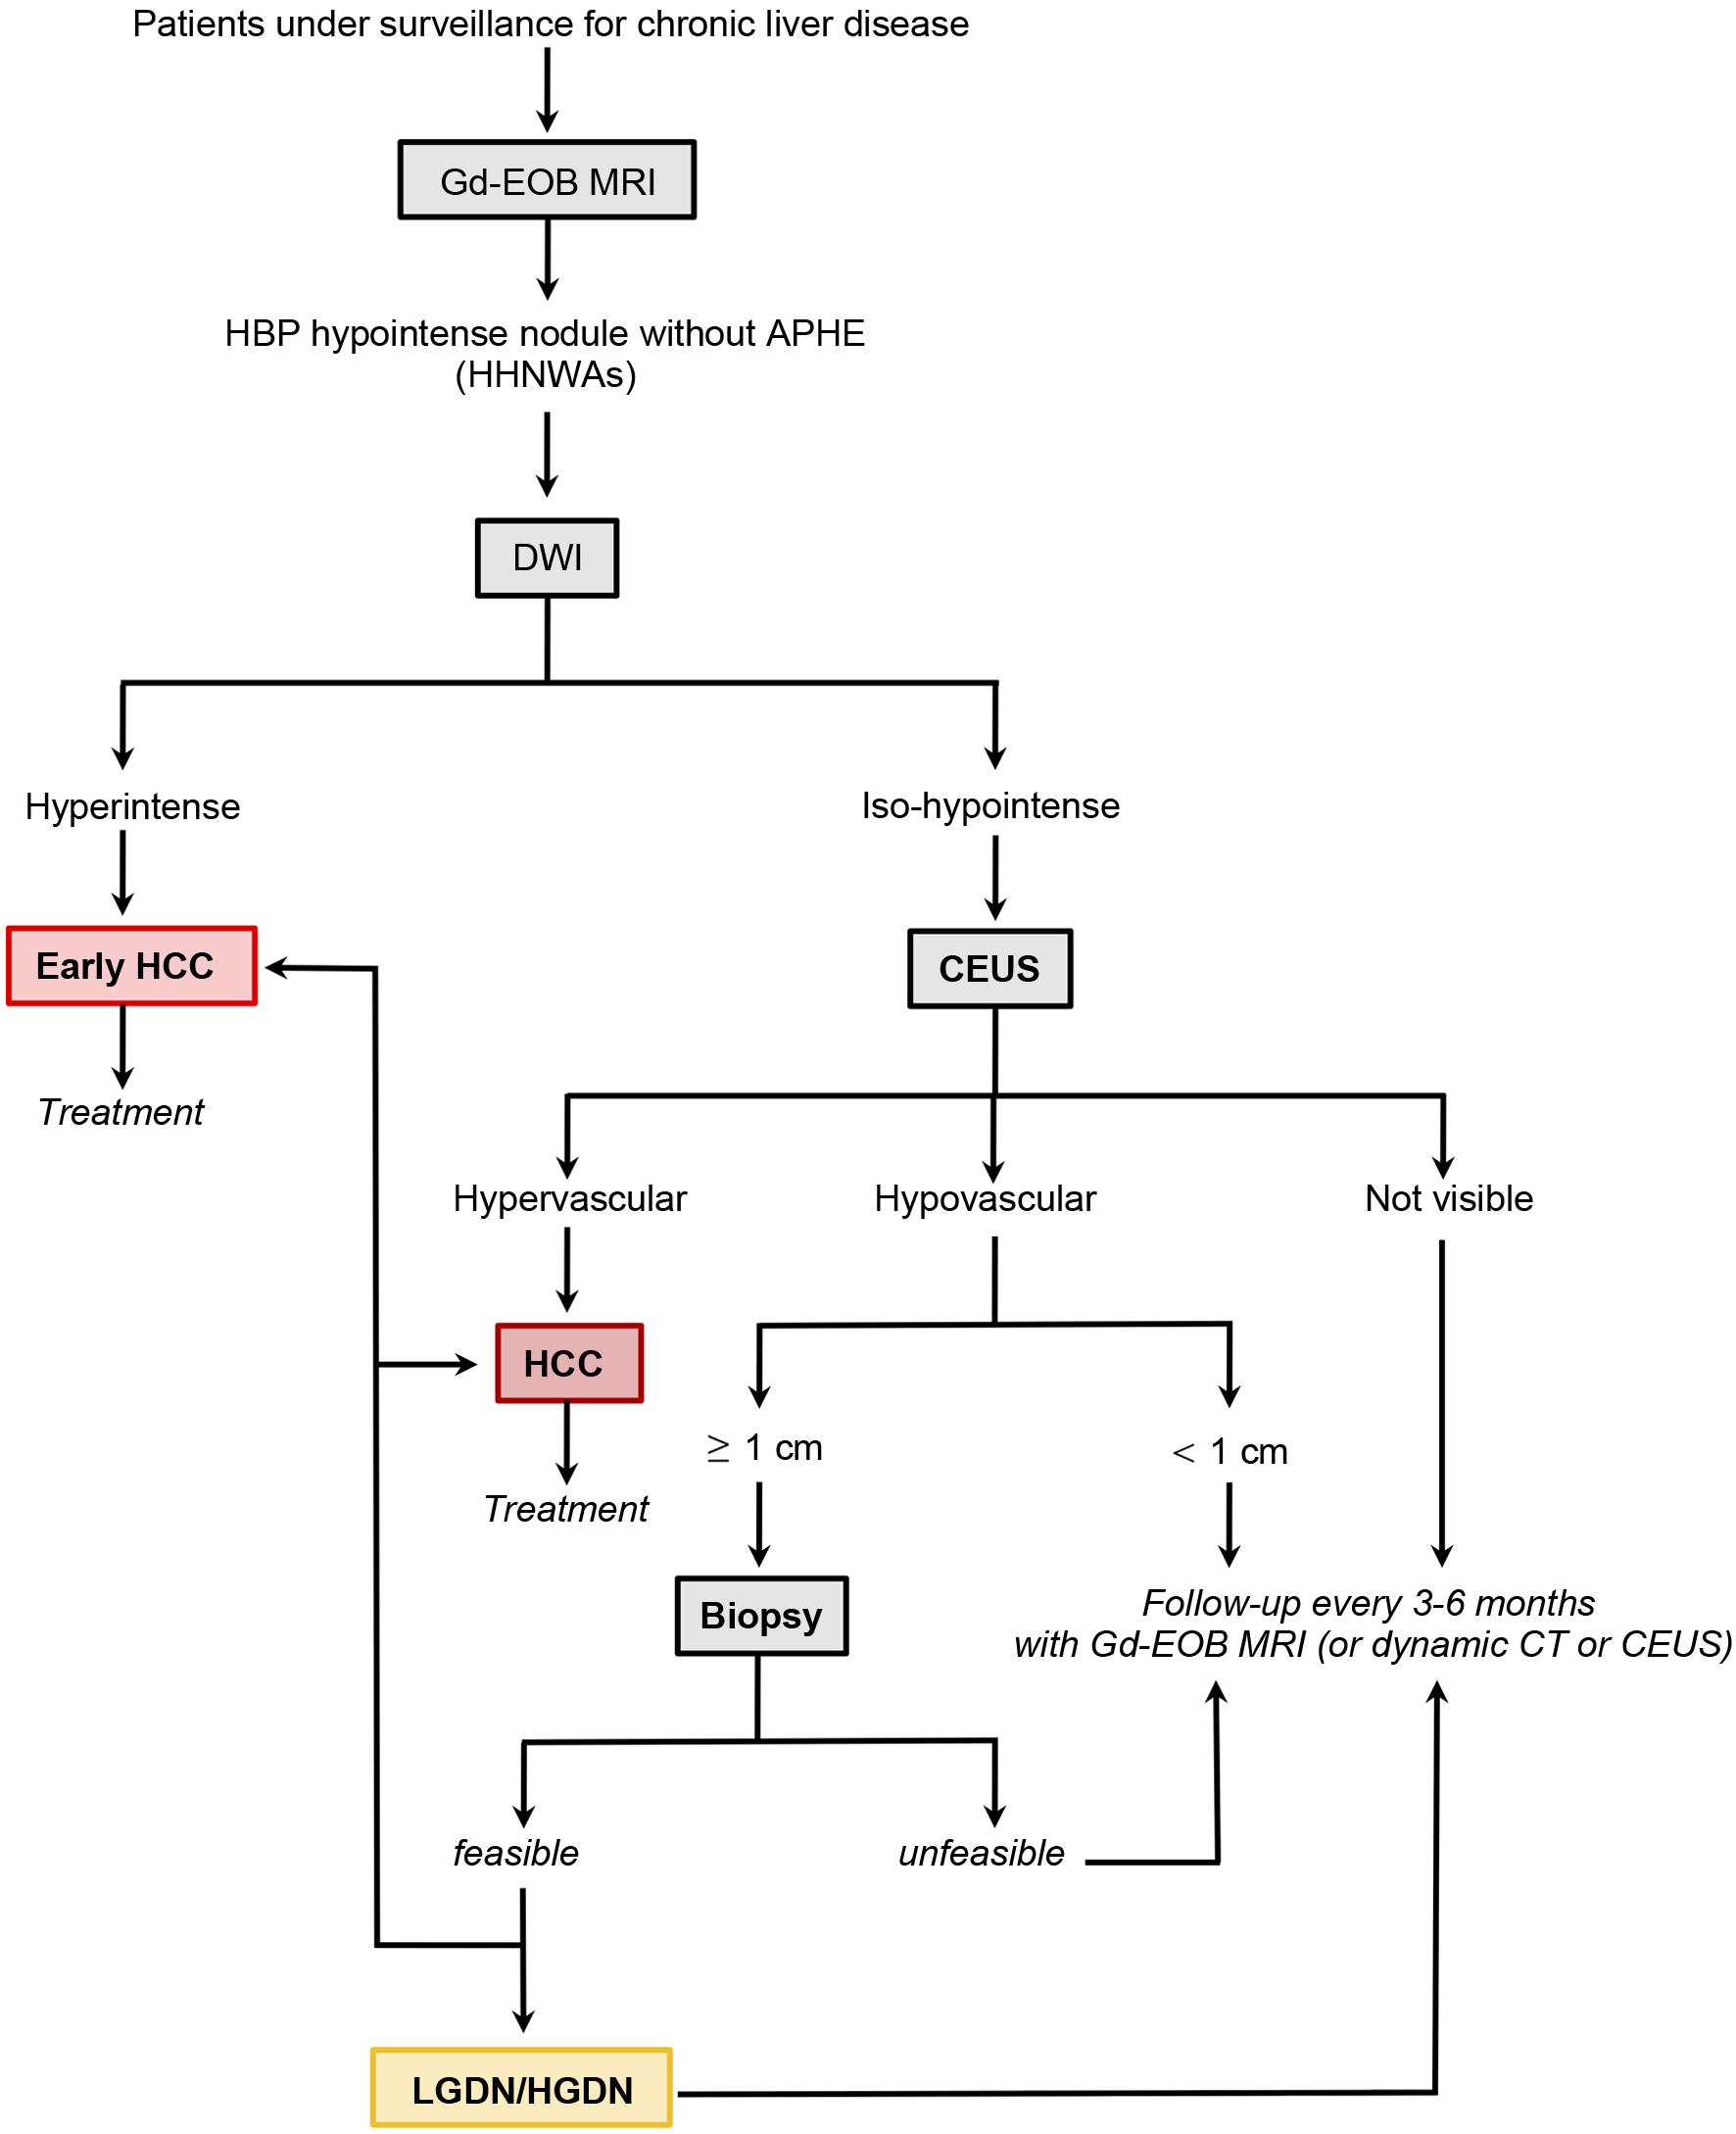 Diagnostic algorithm for evaluation of hepatobiliary phase (HBP) hypointense nodules without arterial phase hyperenhancement (APHE) (HHNWAs) in patients under surveillance for chronic liver disease, modified from Renzulli <italic>et al</italic>.